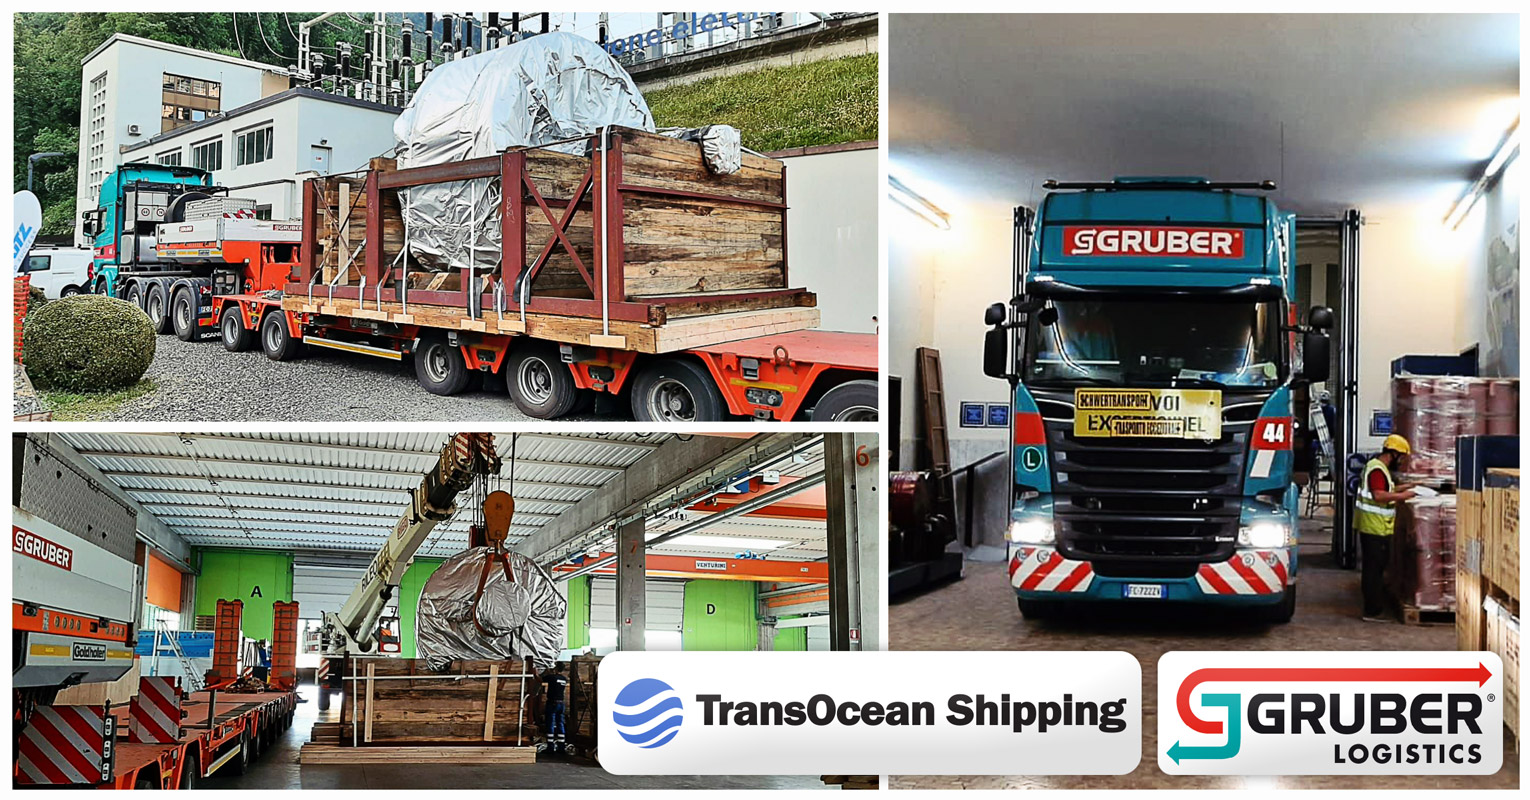 TransOcean Shipping and Gruber Logistics Cooperated on the Delivery of Hydropower Plant Components to South Tyrol, Italy